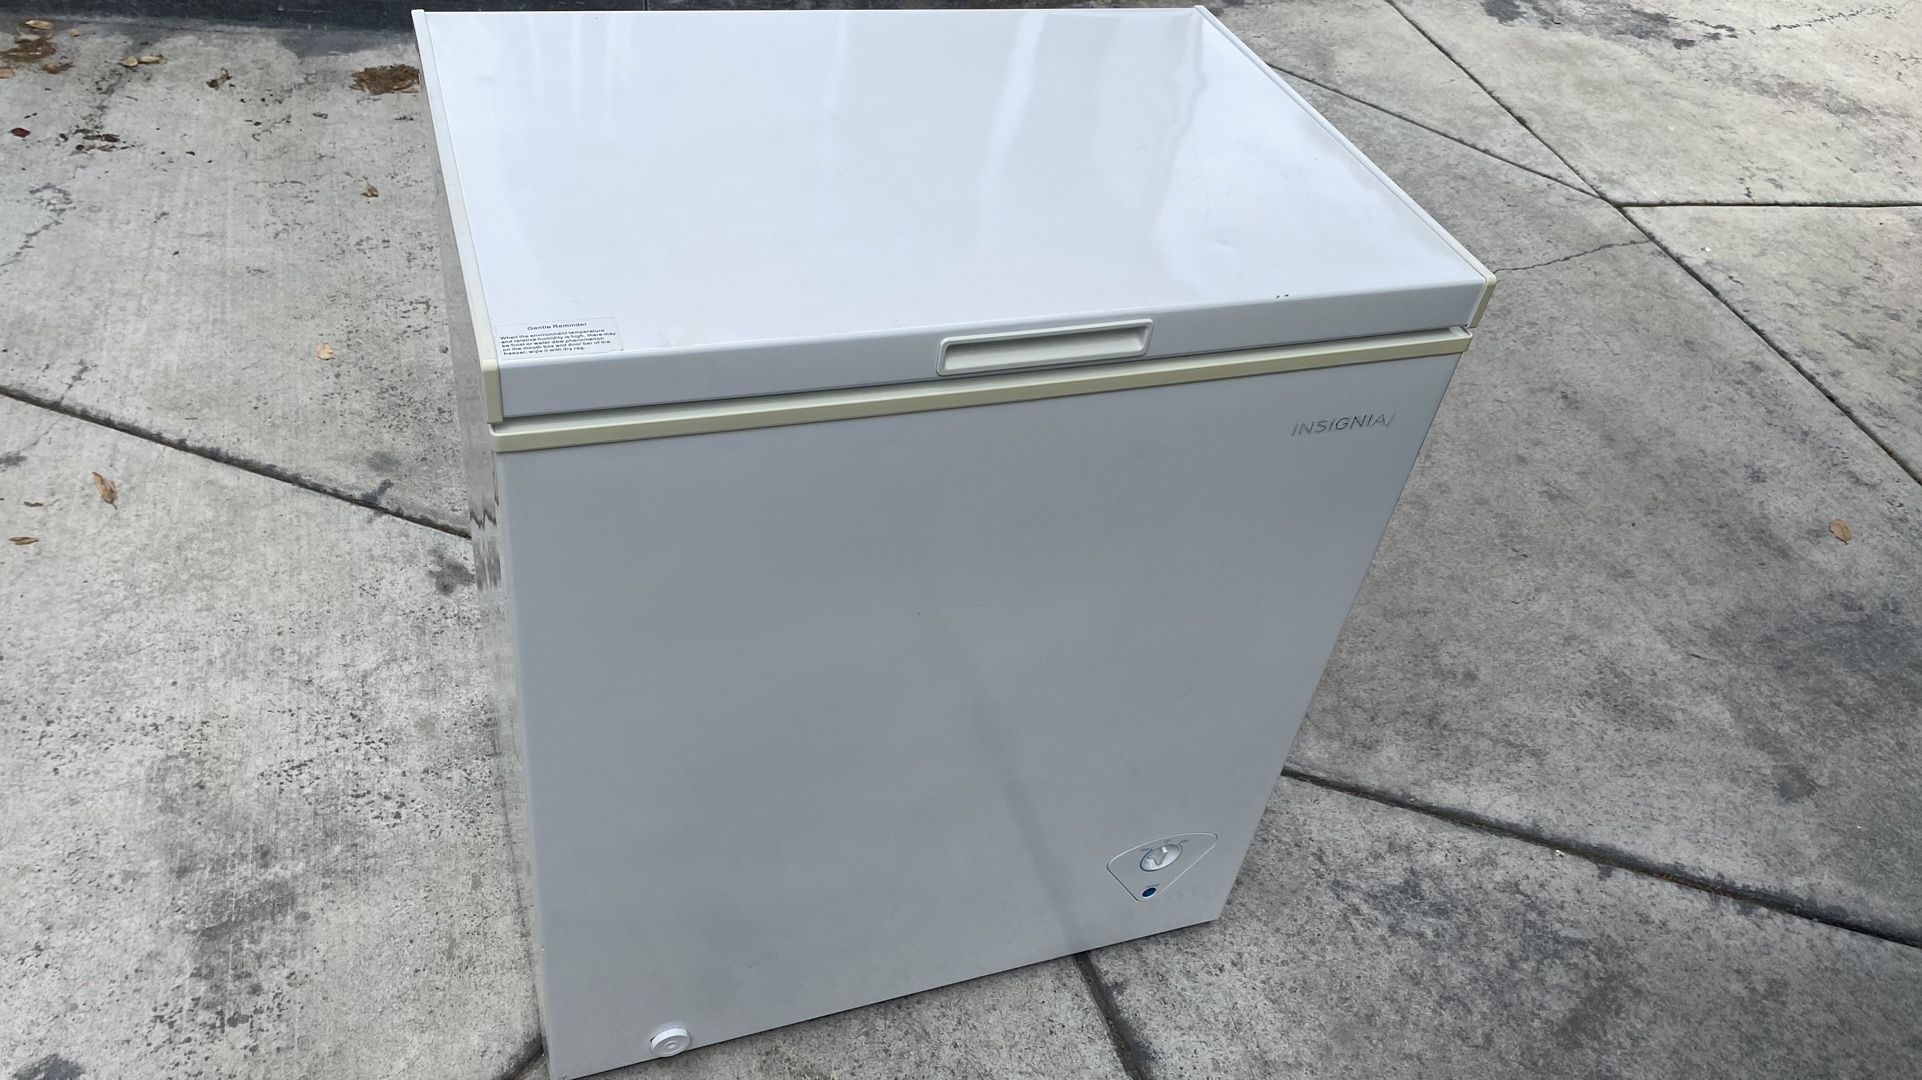 Like New Insignia Freezer For Great Price